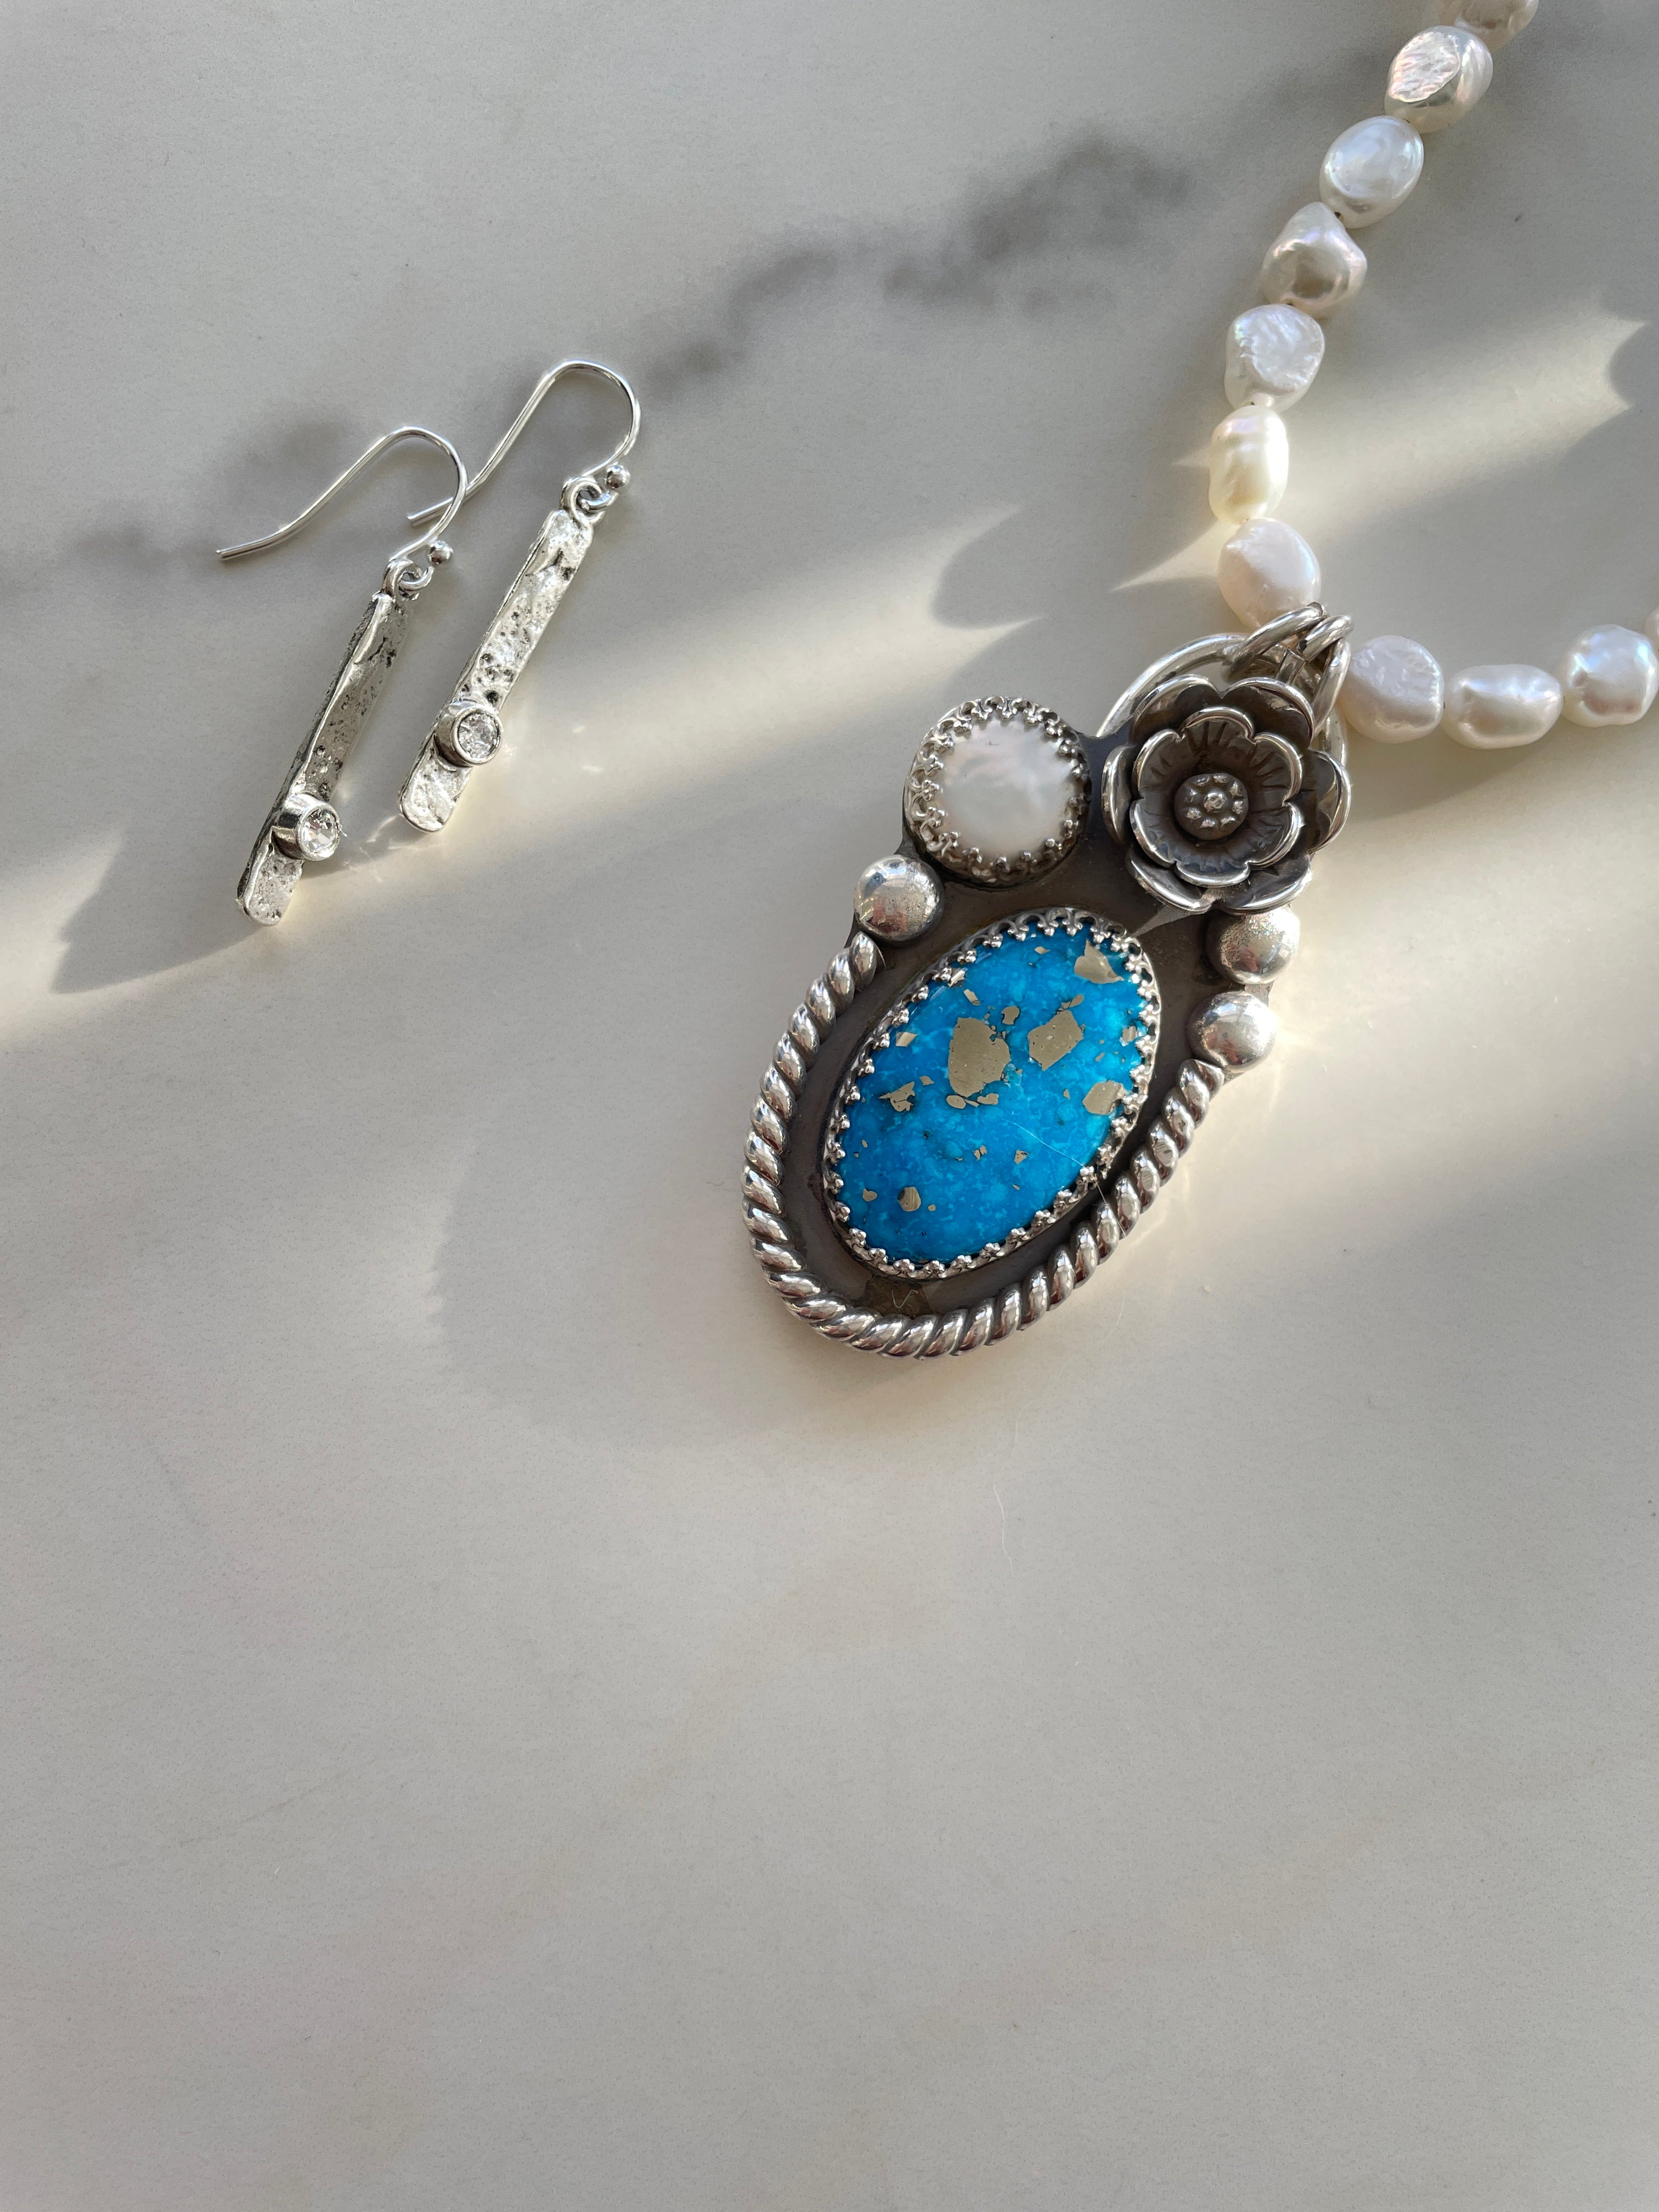 Treasure Pearl and Turquoise Necklace